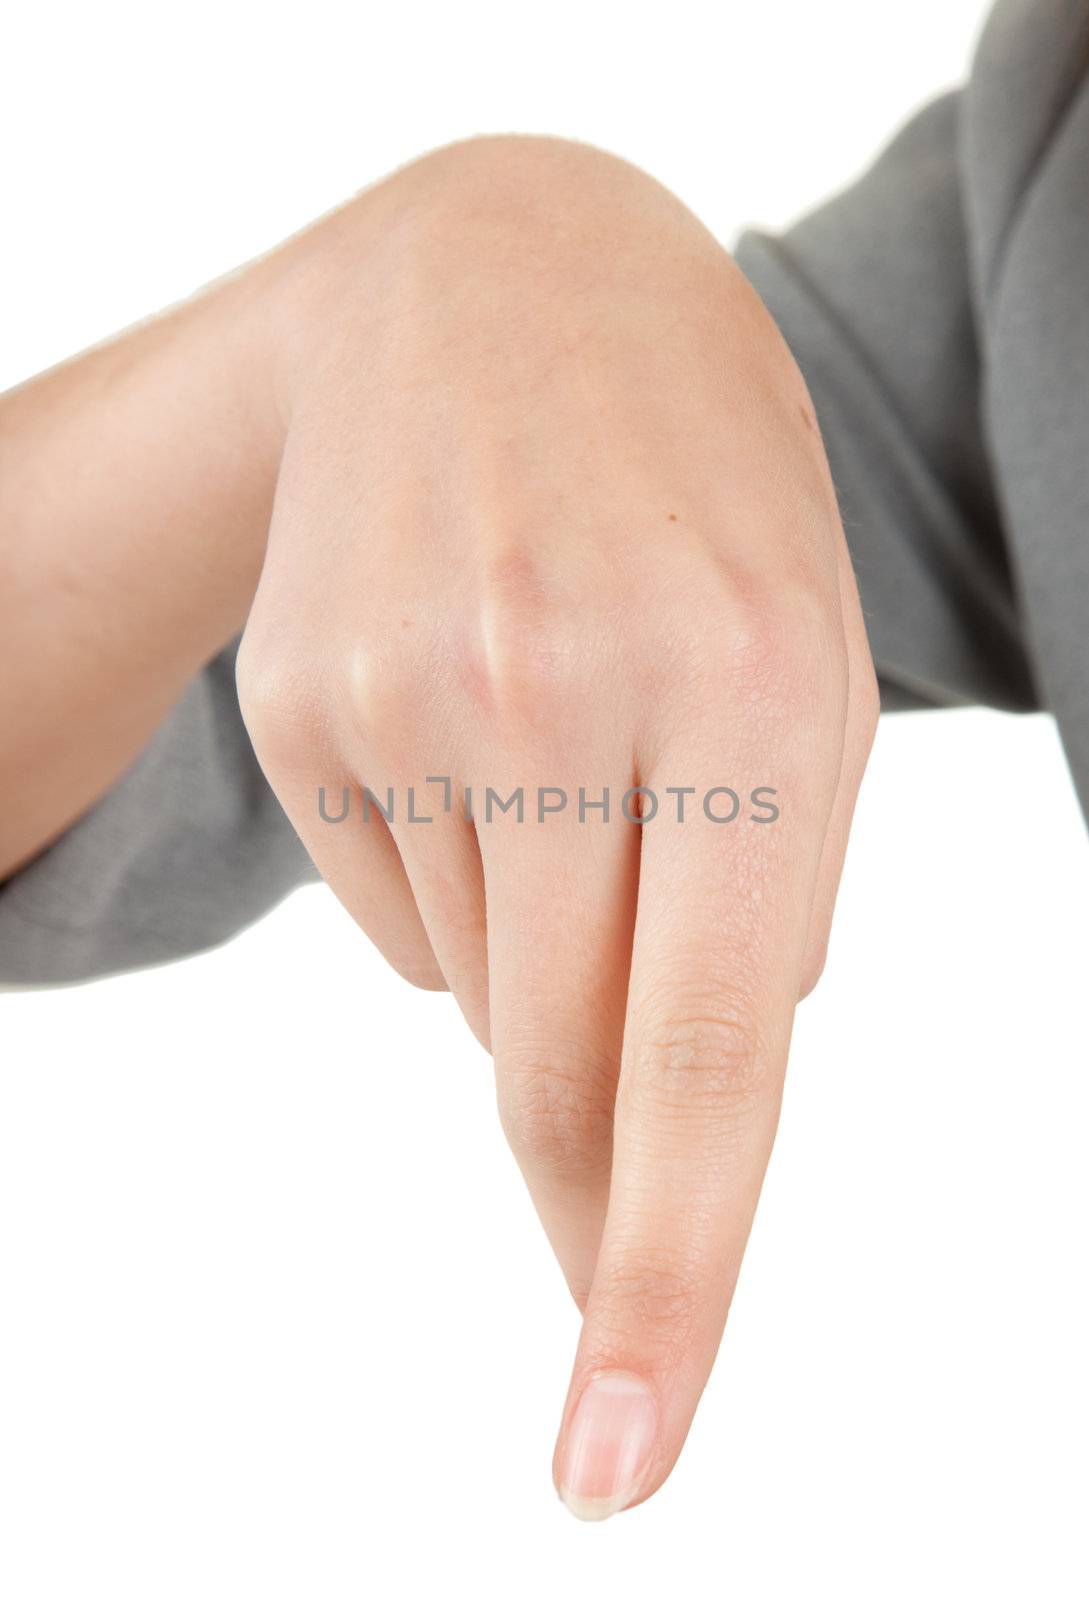 skip sign with his hand on a white background